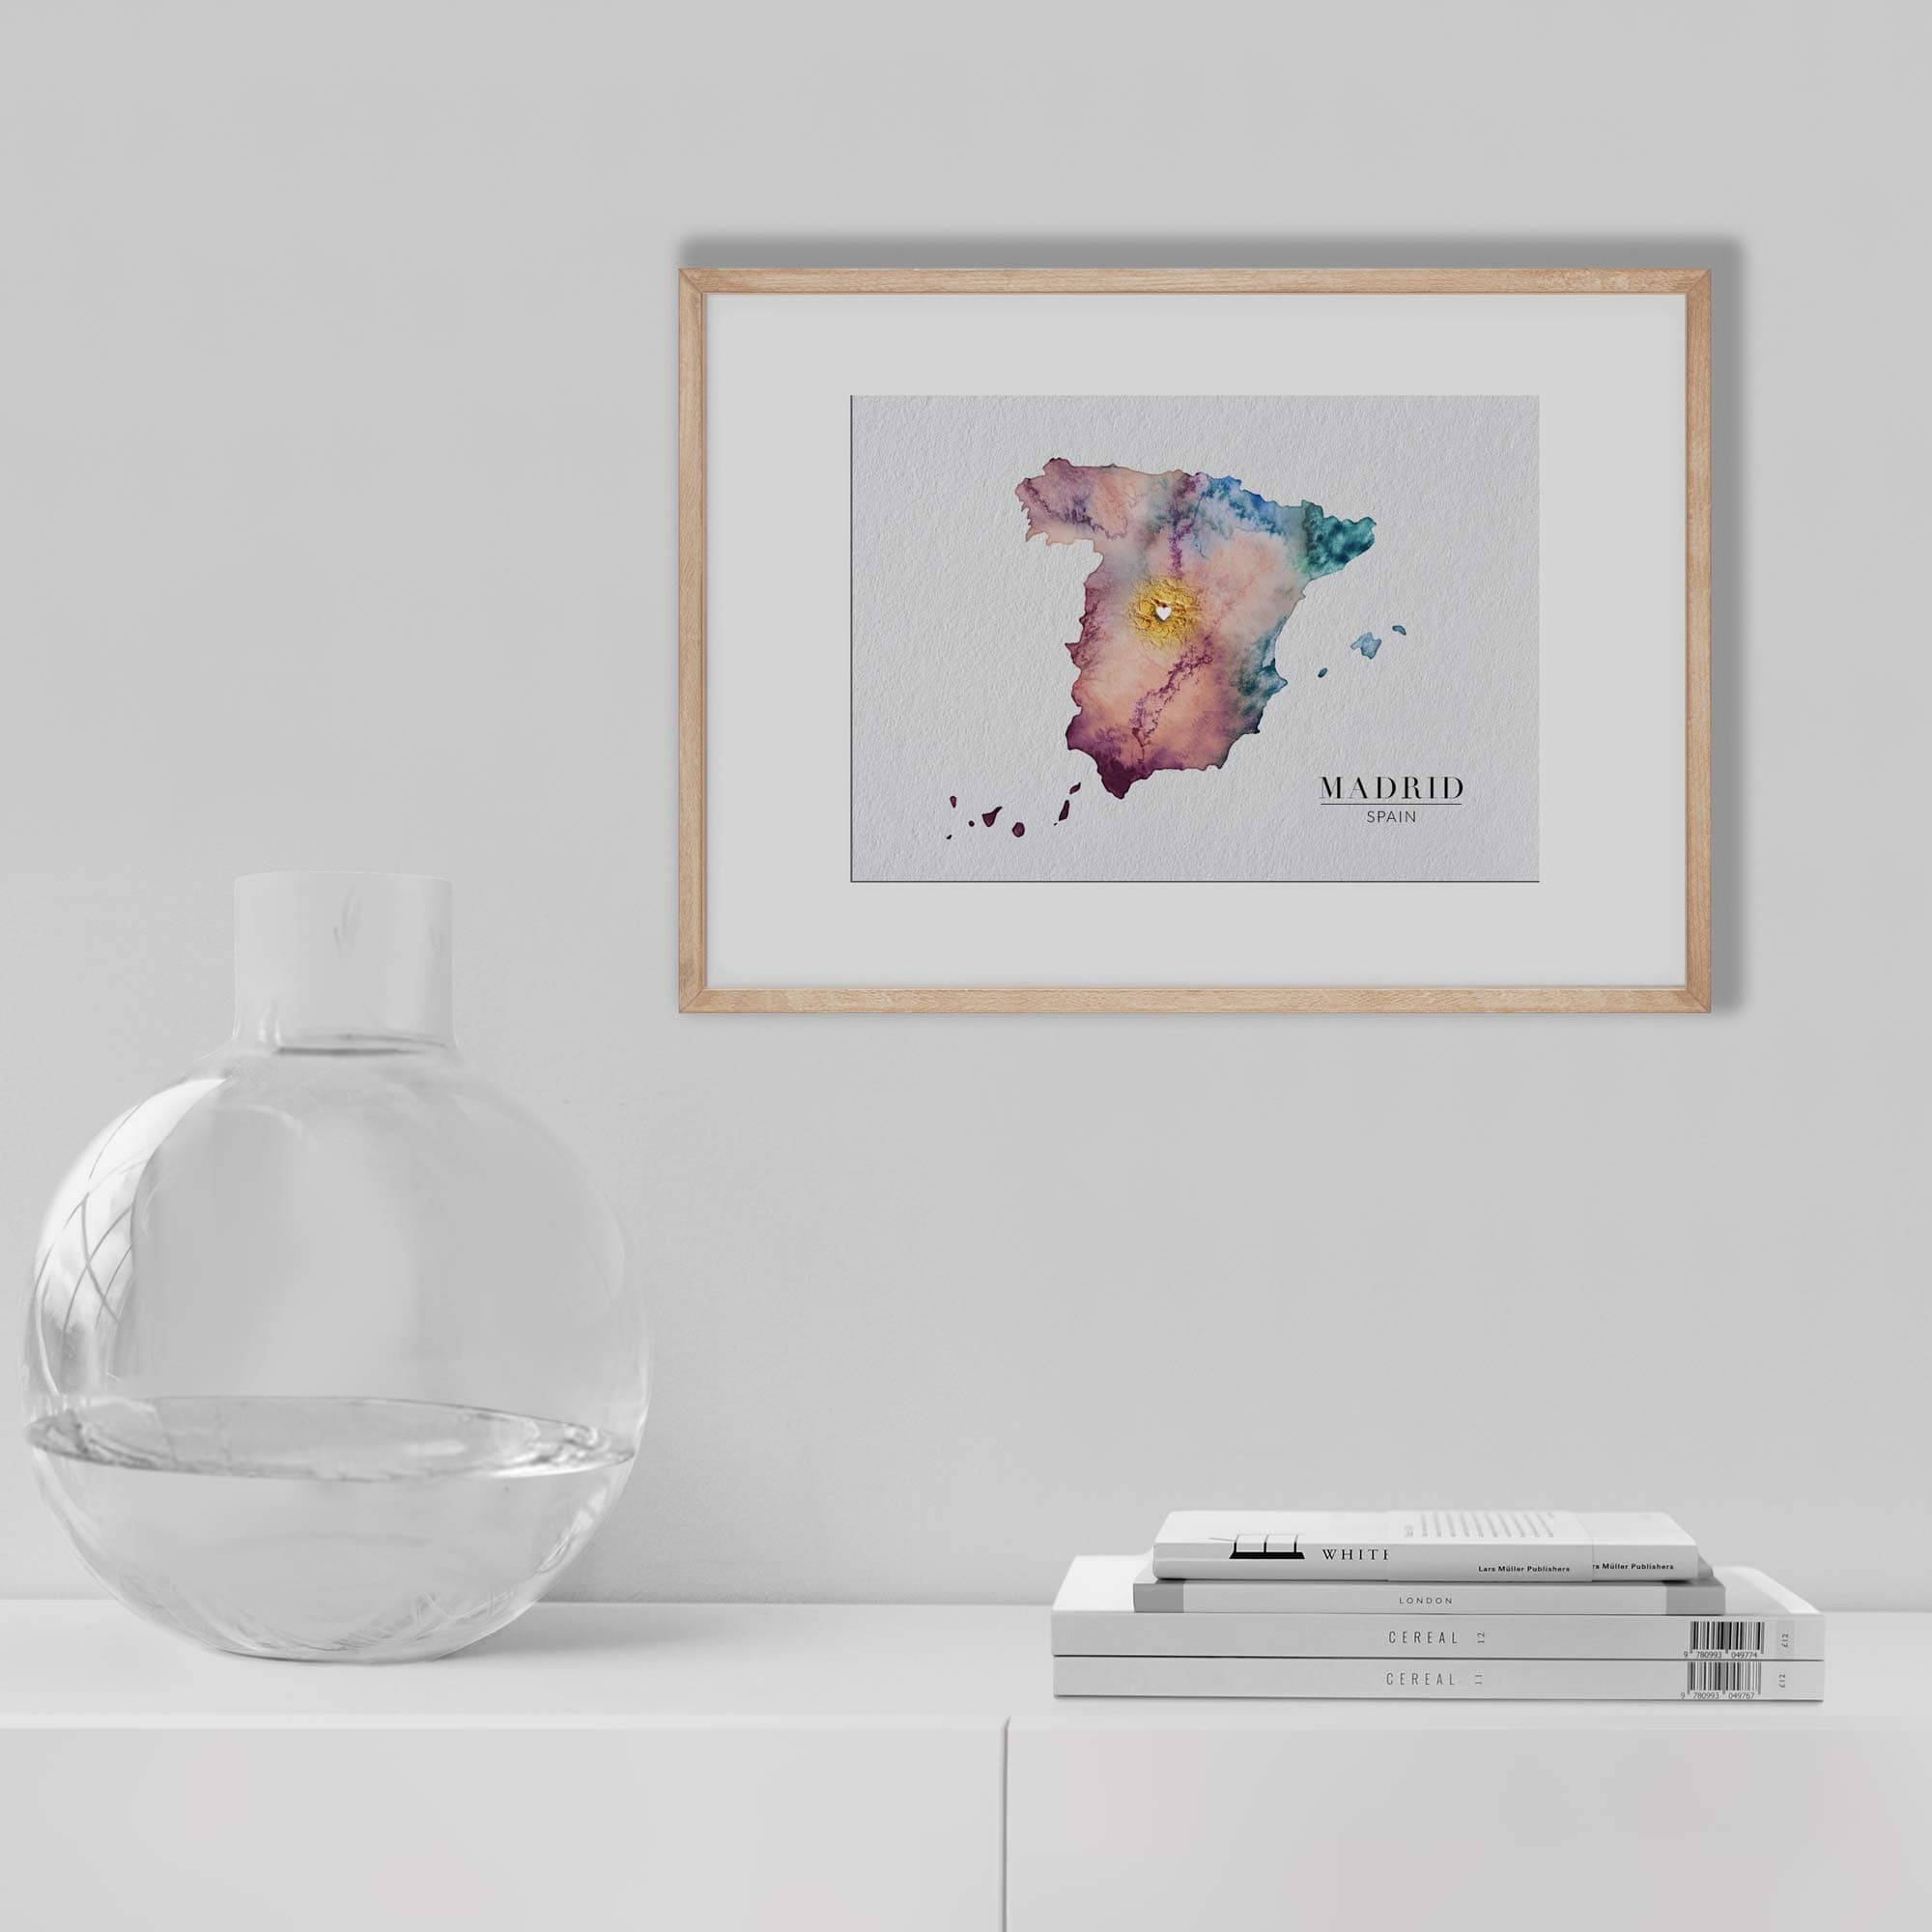 EJayDesign Countries Other Spannish Golden Watercolour Map